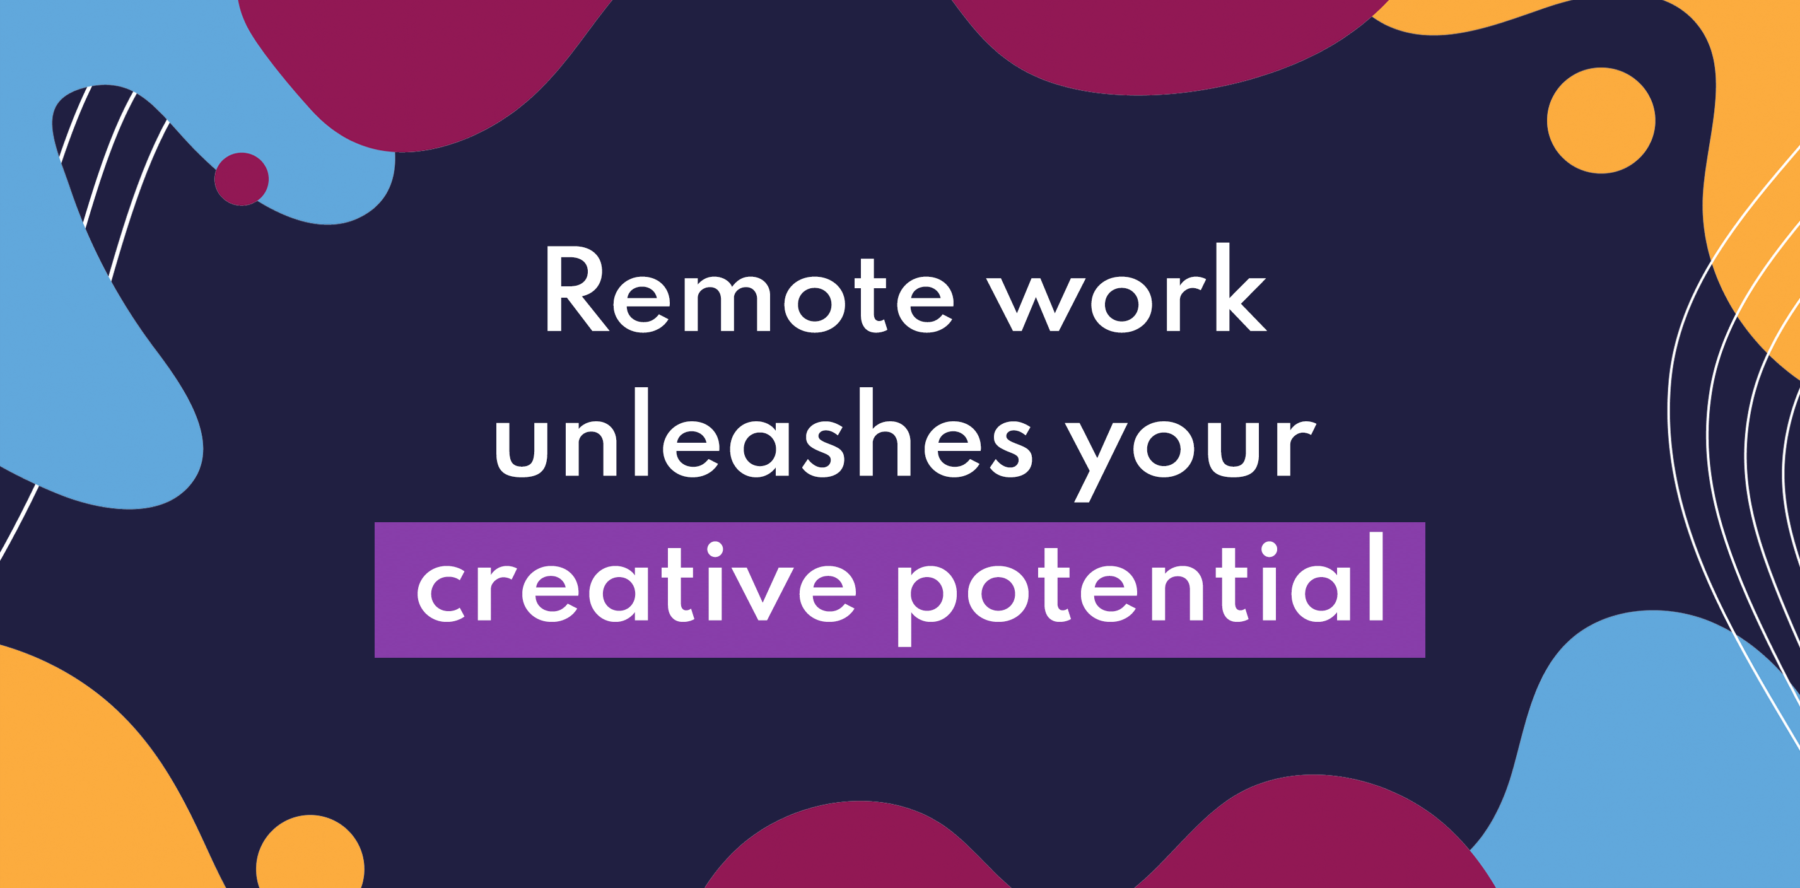 remote work unleashes your creative potential